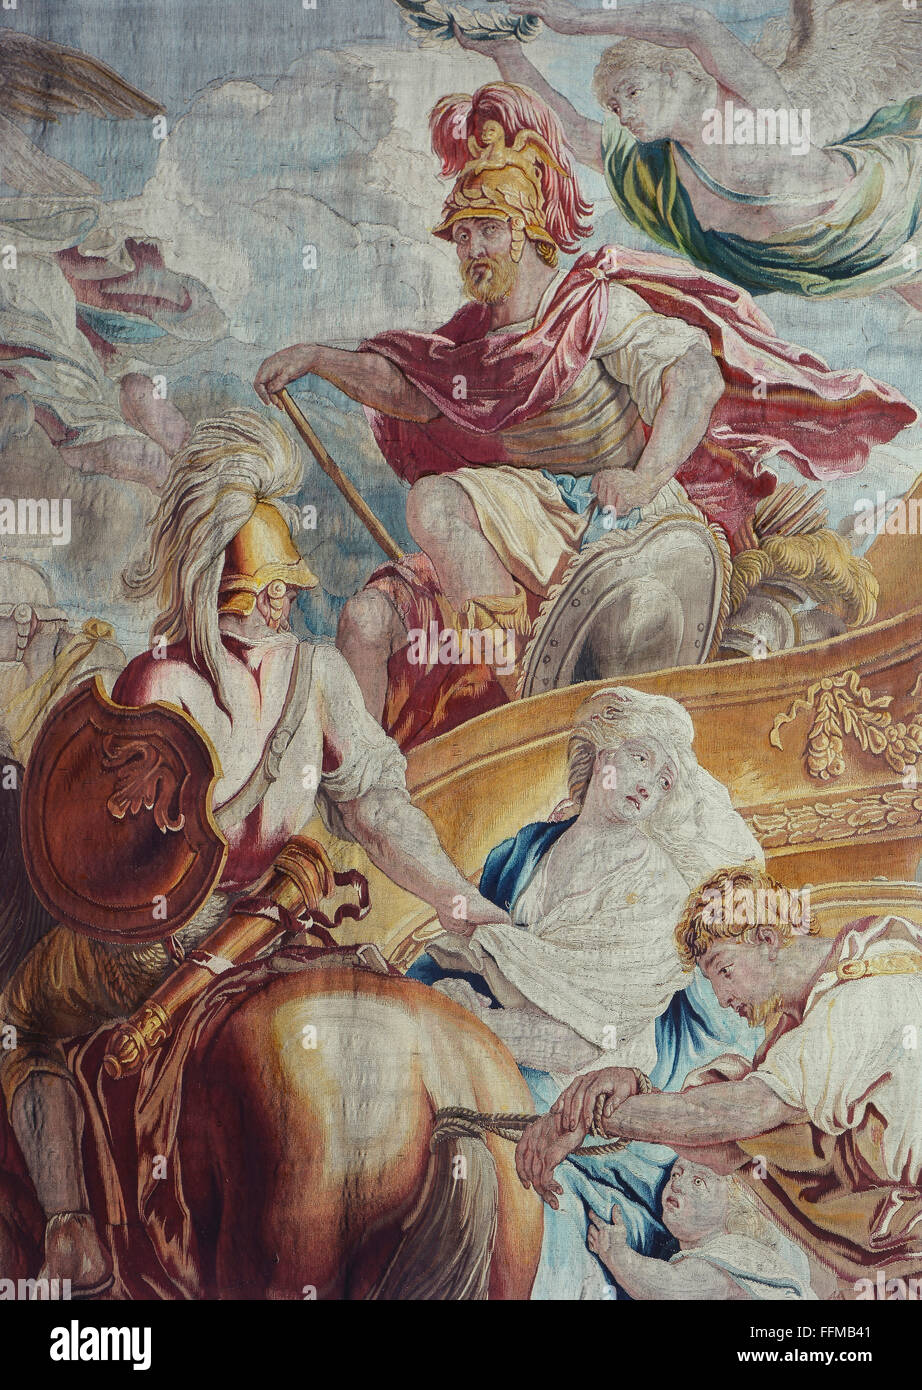 allegories, 'Triumph of Mars', tapestry, detail, after design by Jan van Orley, Augustin Coppens, circa 1720, 700 x 400 cm, manufactory Reydams-Leyniers, Bruxelles, Bavarian National Museum, Munich, Germany, Additional-Rights-Clearences-Not Available Stock Photo